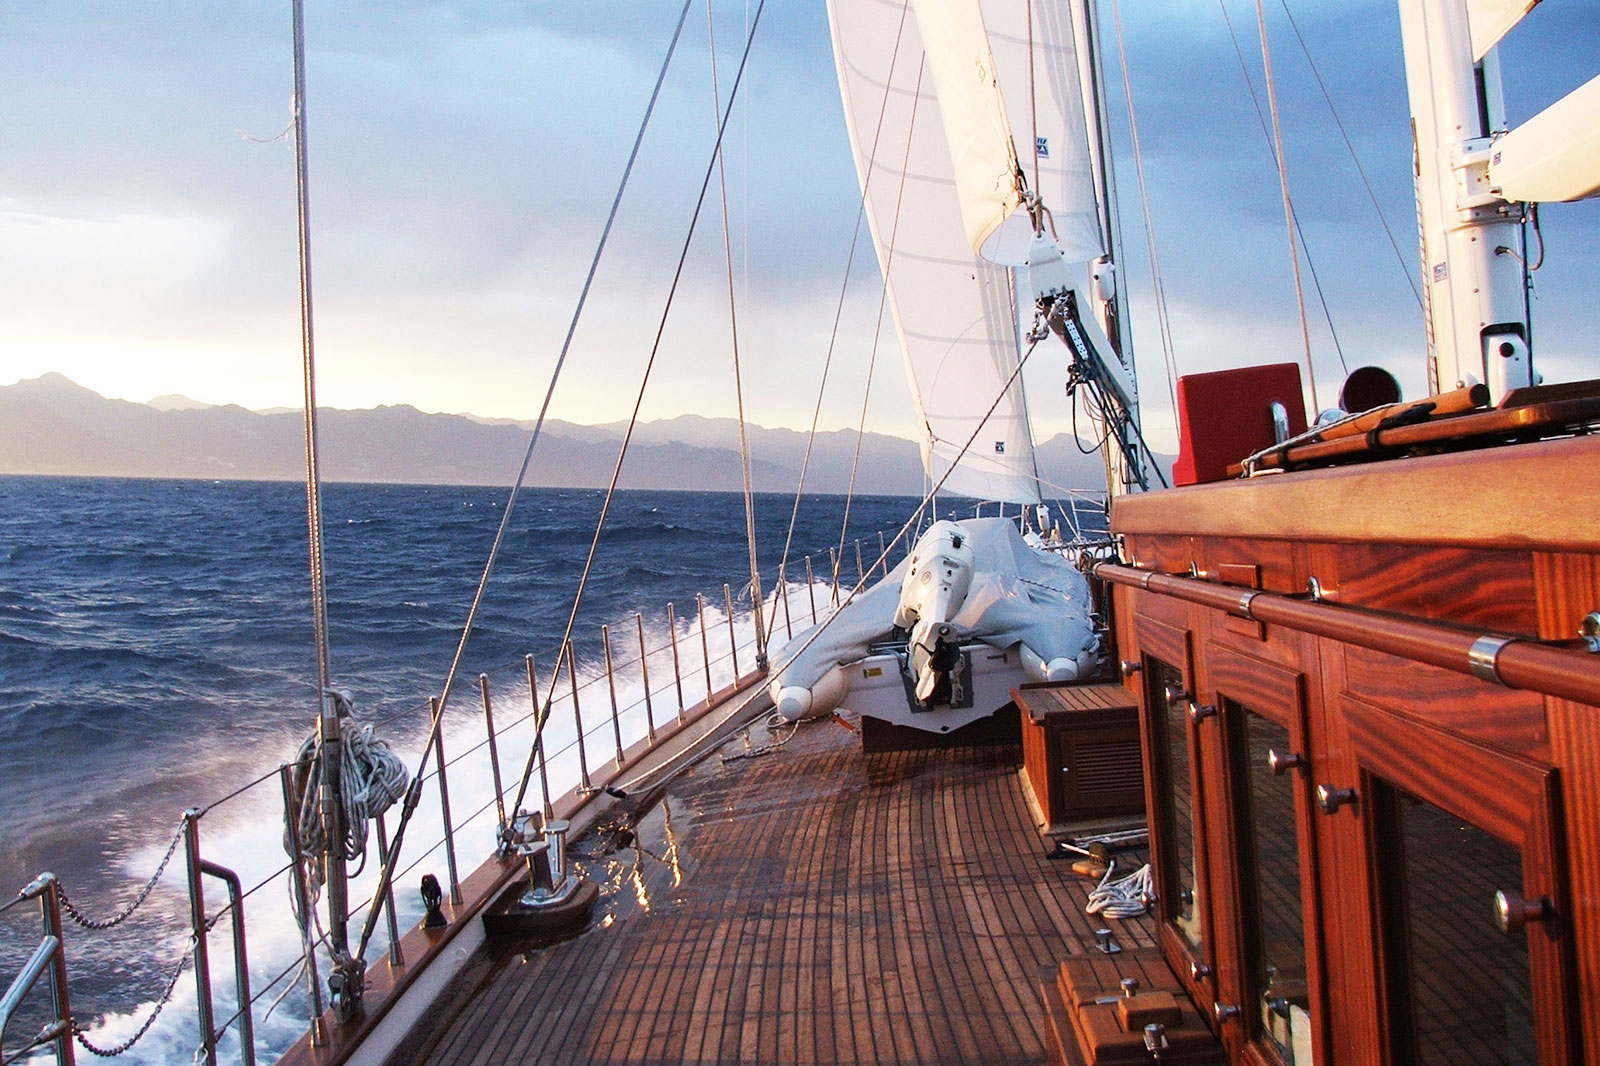 Sailing in a relaxed and sportive way on SY Chronos, SY Kairos and SY Rhea